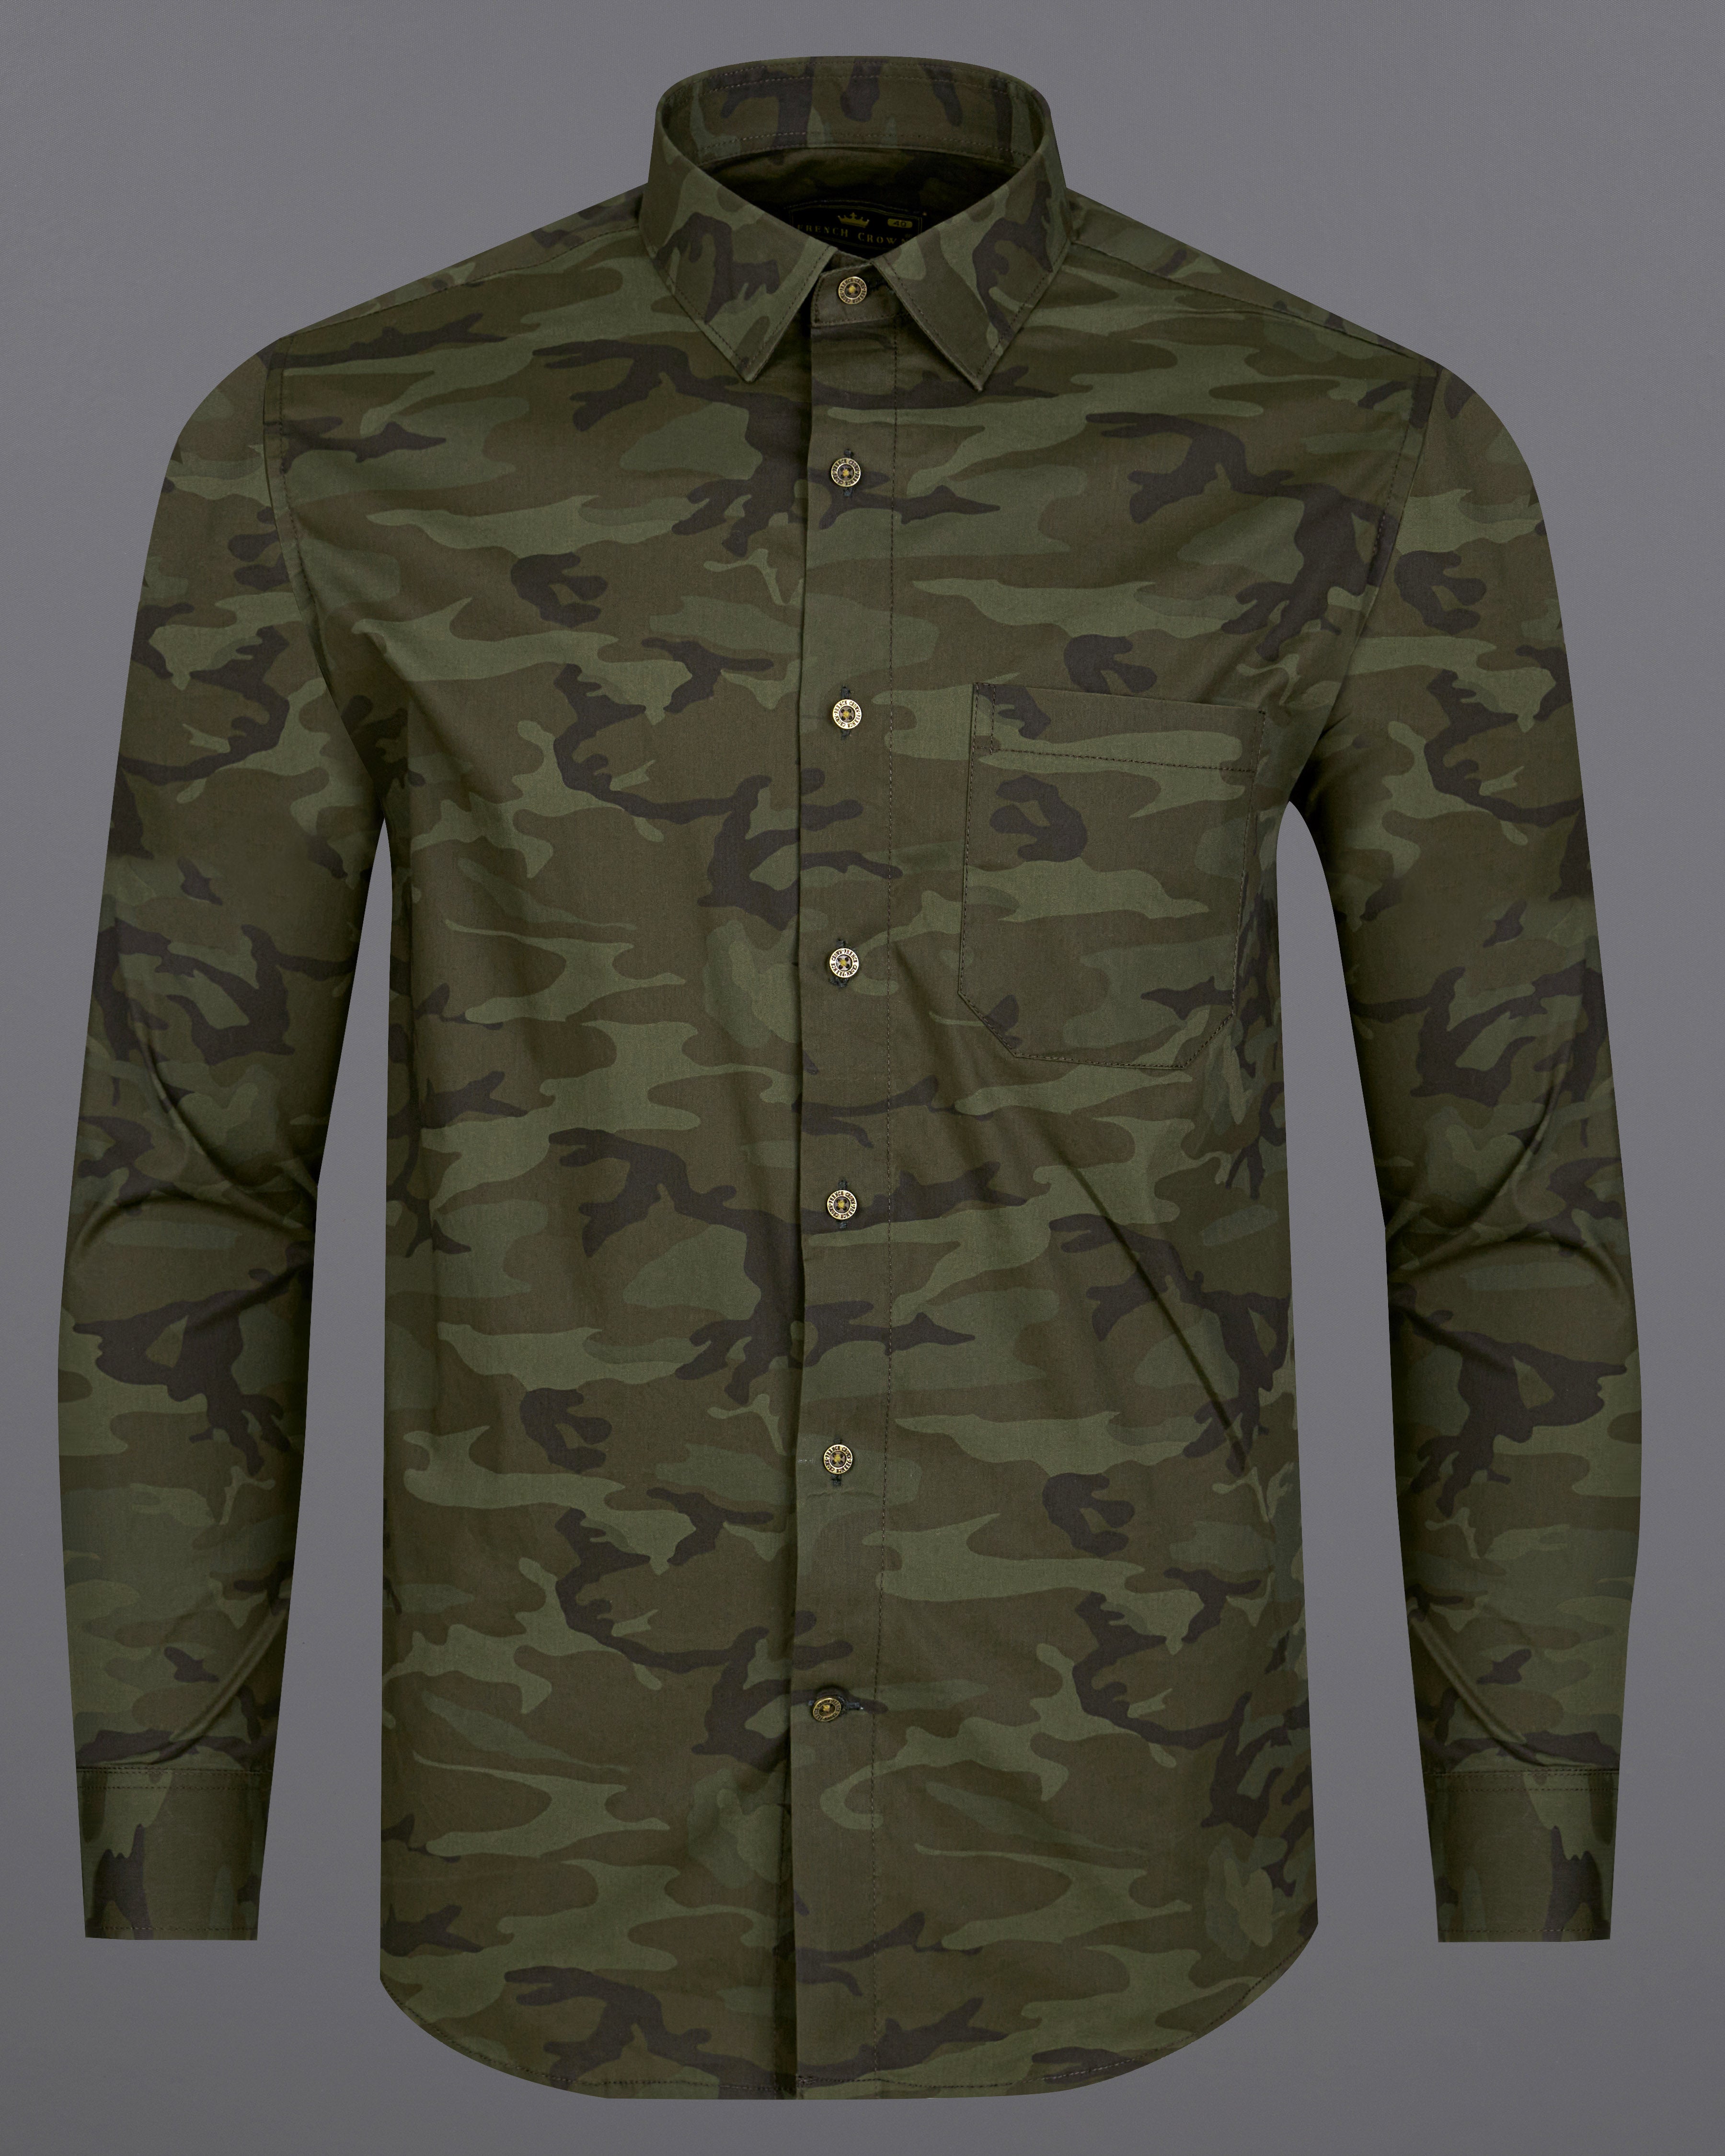 Taupe Green with Finch Green Camouflage Printed Royal Oxford Shirt 8893-MB-38, 8893-MB-H-38,  8893-MB-39,  8893-MB-H-39,  8893-MB-40,  8893-MB-H-40,  8893-MB-42,  8893-MB-H-42,  8893-MB-44,  8893-MB-H-44,  8893-MB-46,  8893-MB-H-46,  8893-MB-48,  8893-MB-H-48,  8893-MB-50,  8893-MB-H-50,  8893-MB-52,  8893-MB-H-52